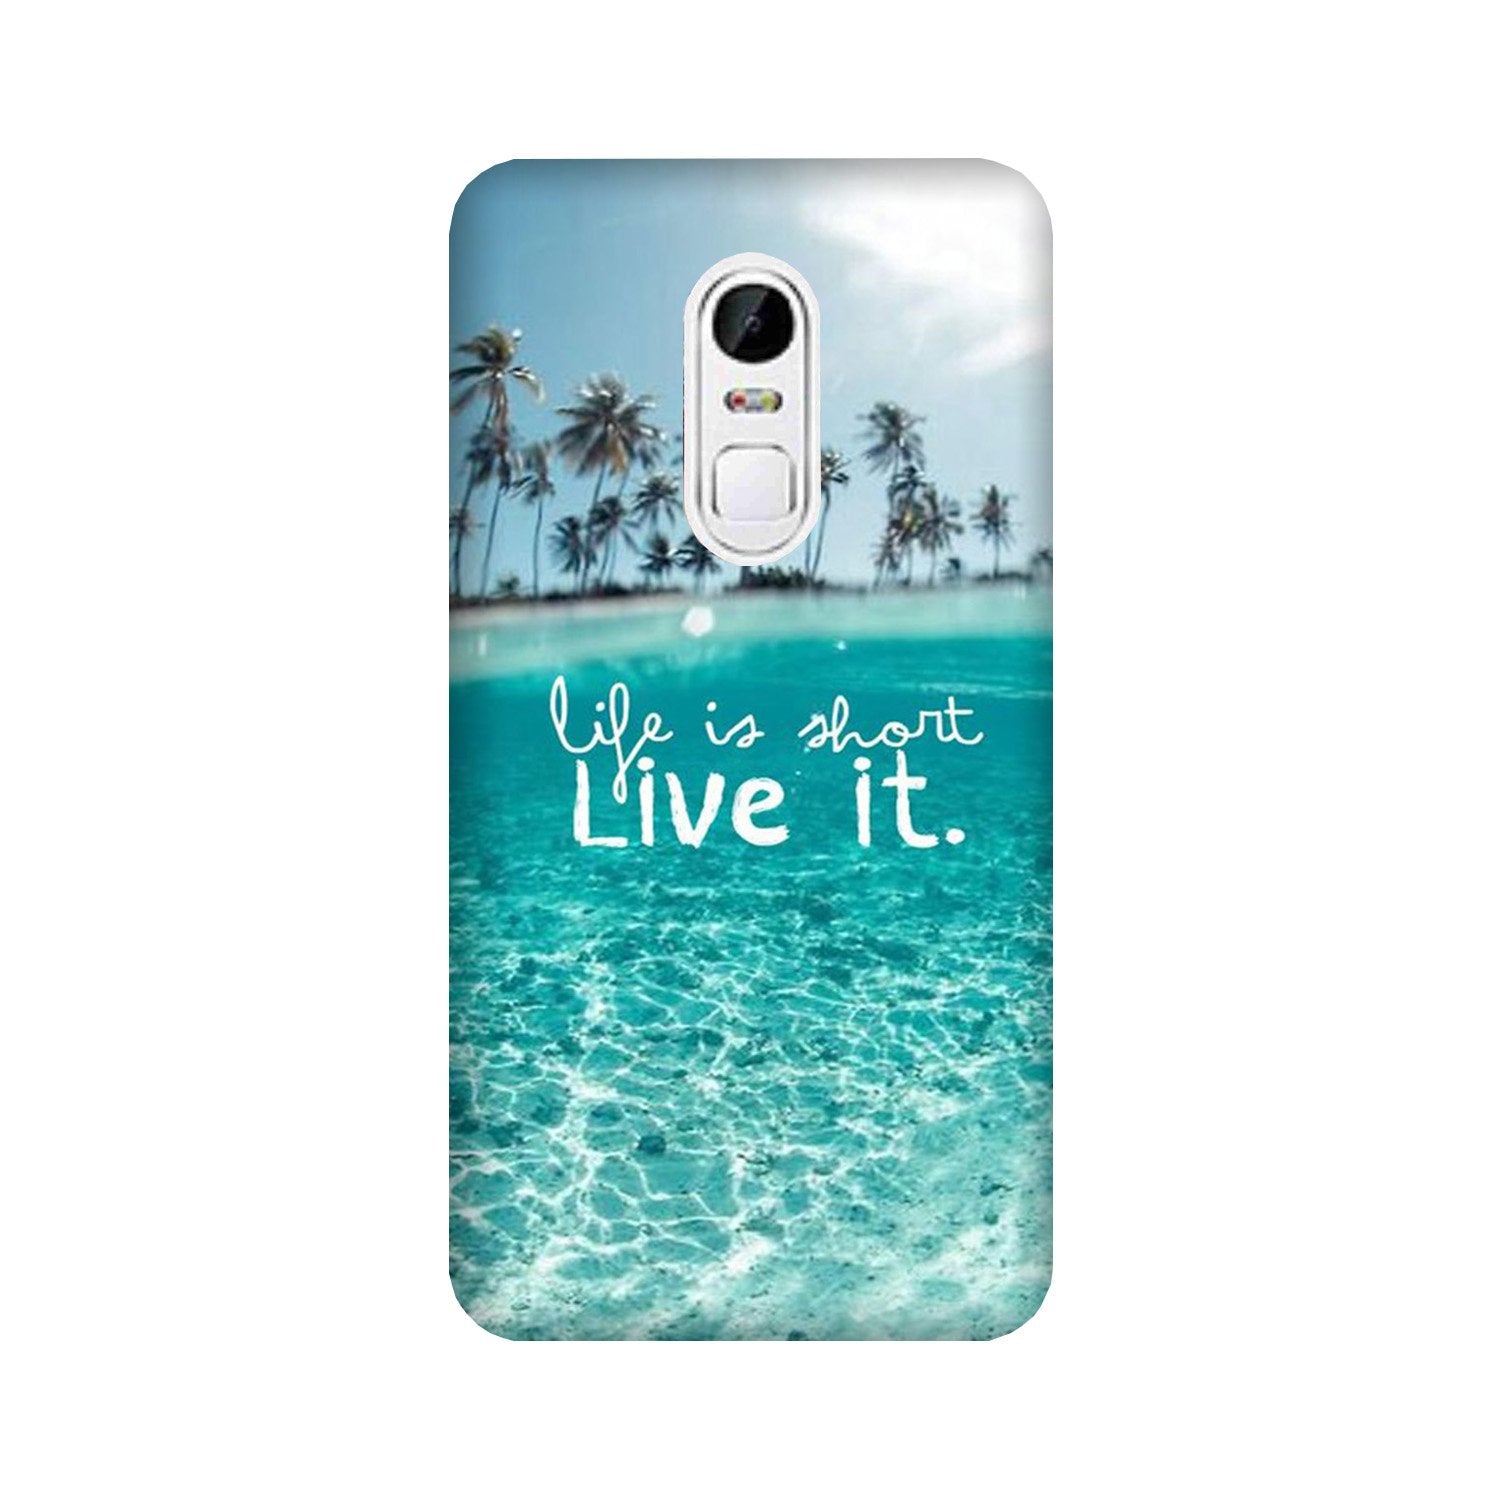 Life is short live it Case for Lenovo Vibe X3